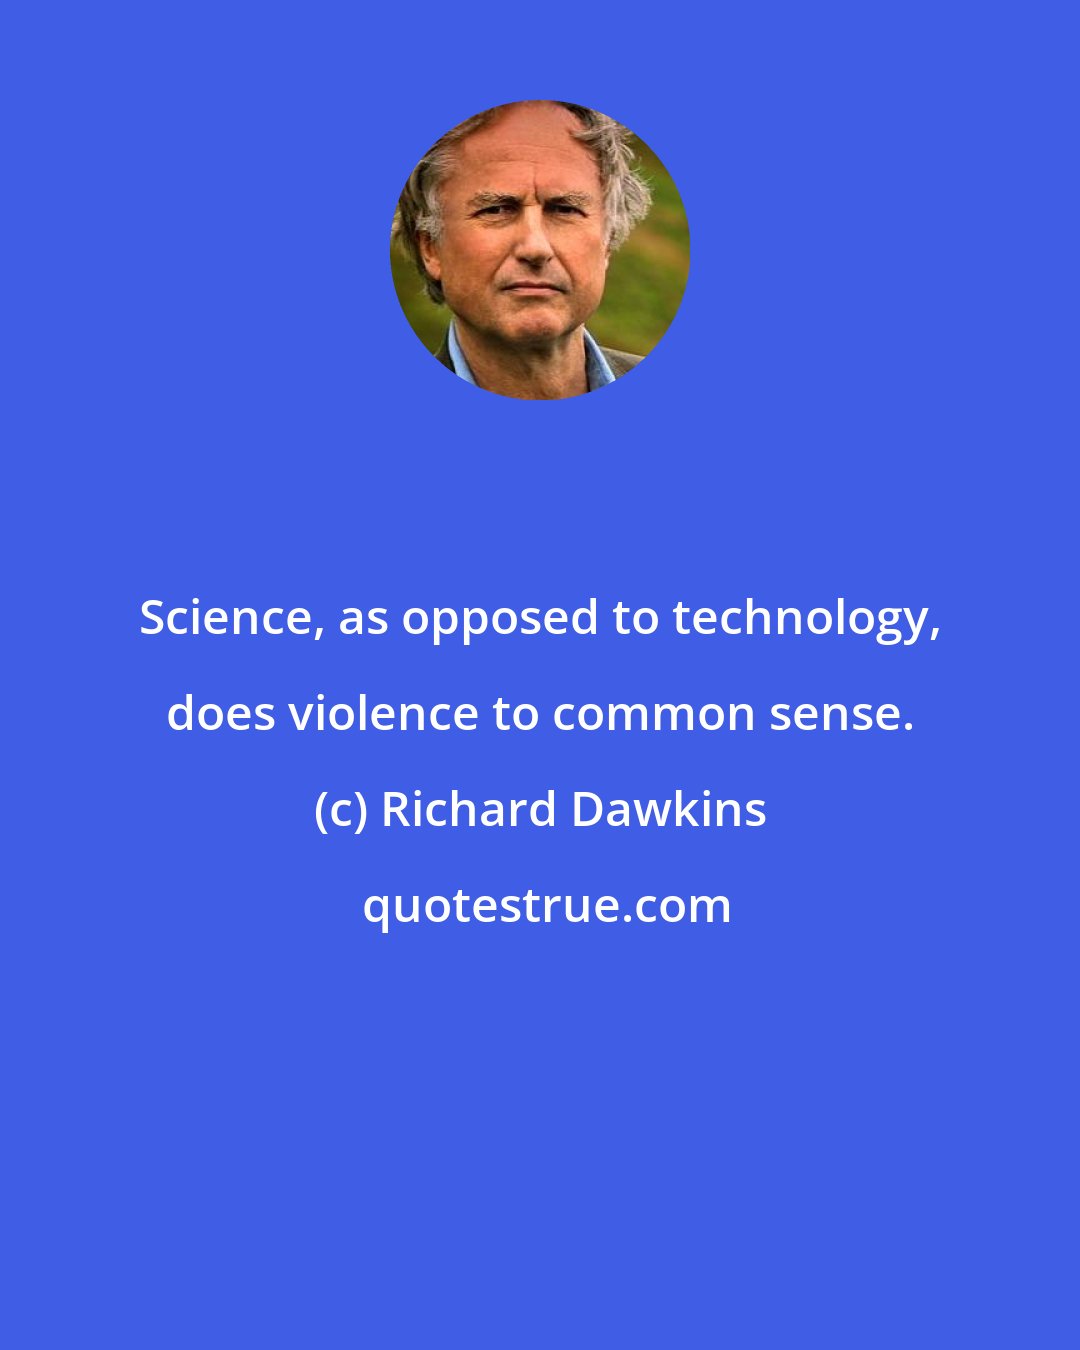 Richard Dawkins: Science, as opposed to technology, does violence to common sense.